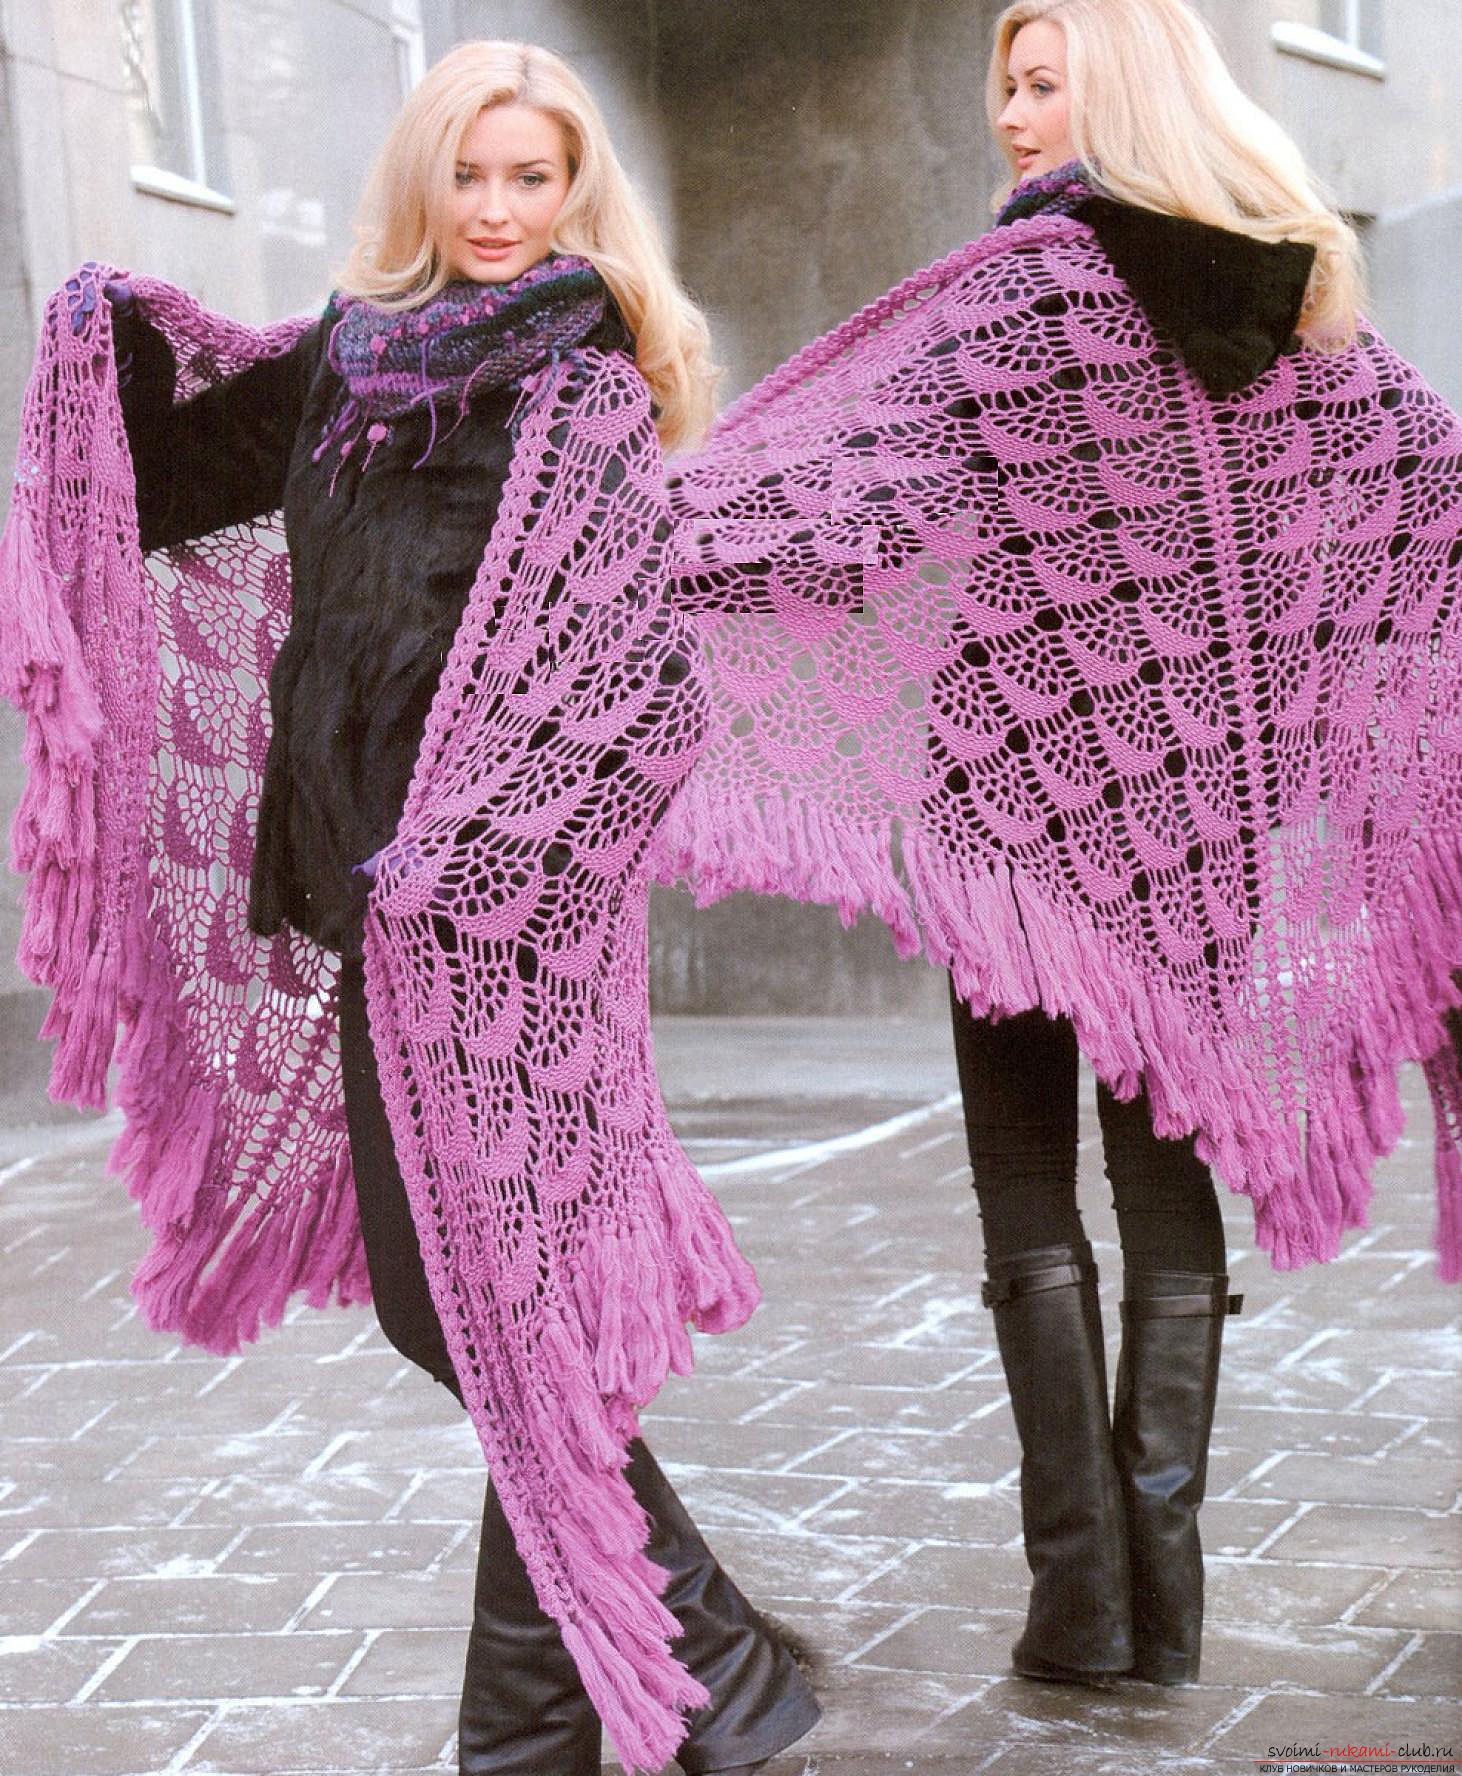 crocheted exquisite women's shawl. Picture №3